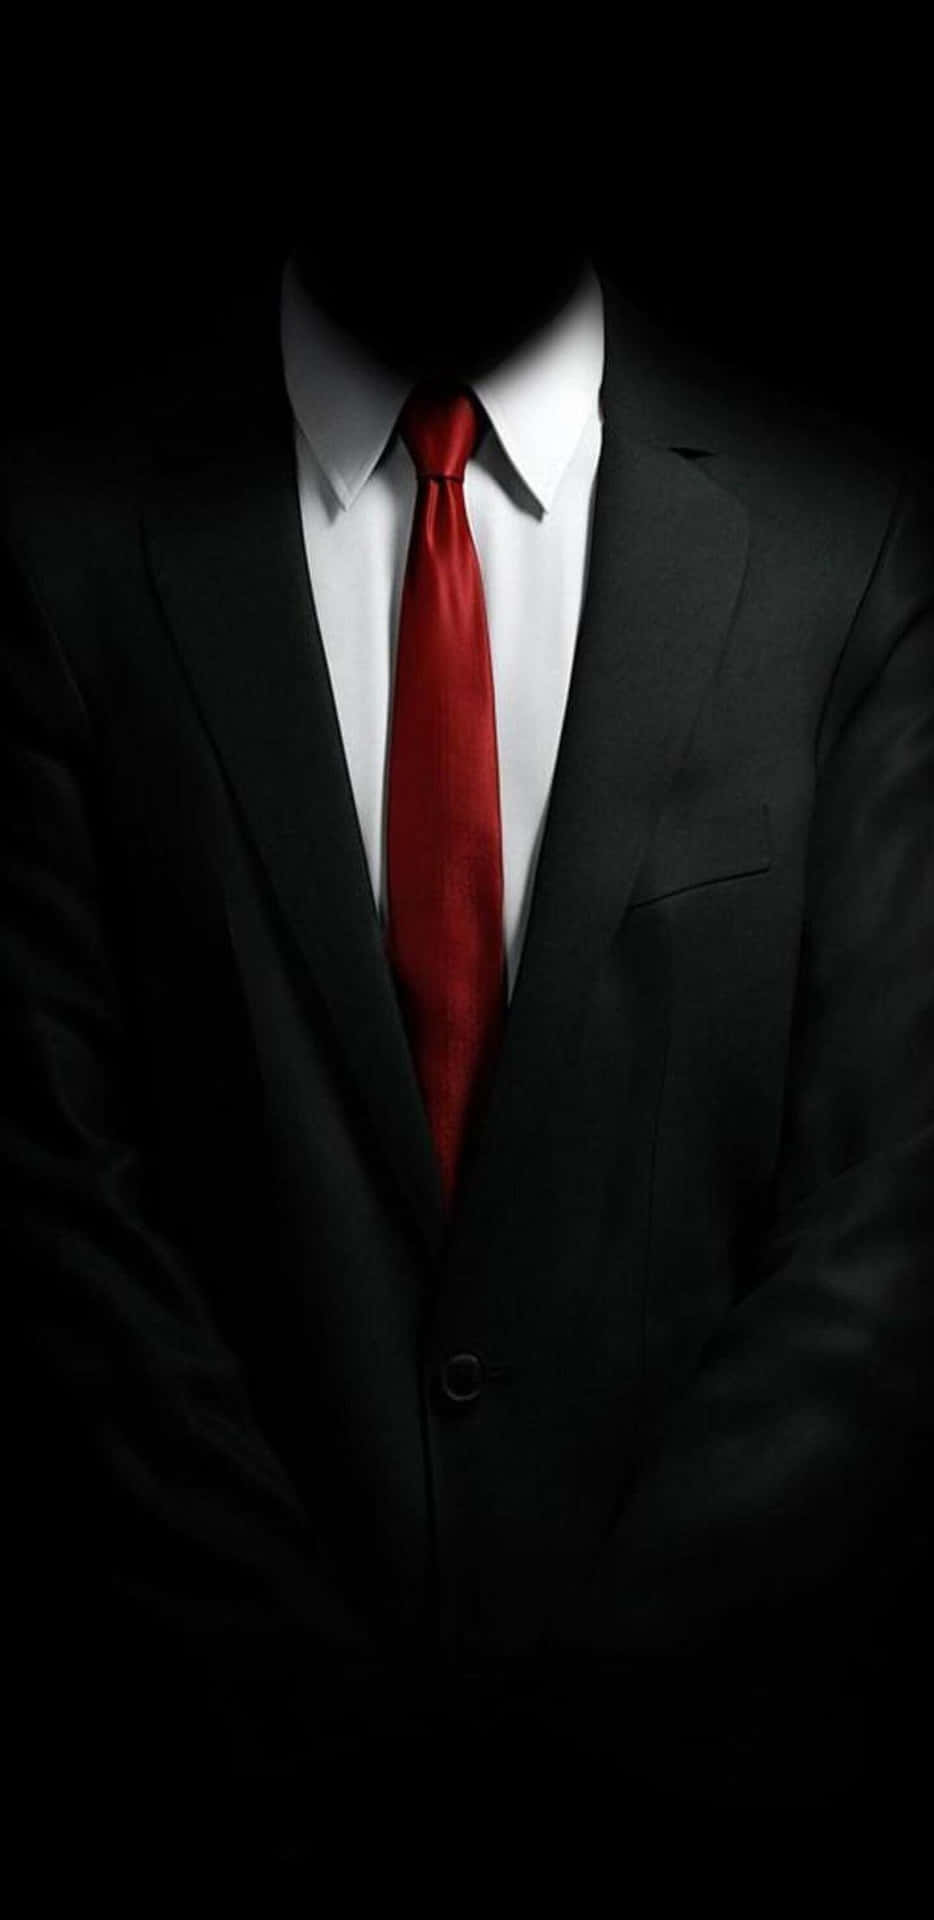 A Man In A Suit And Red Tie